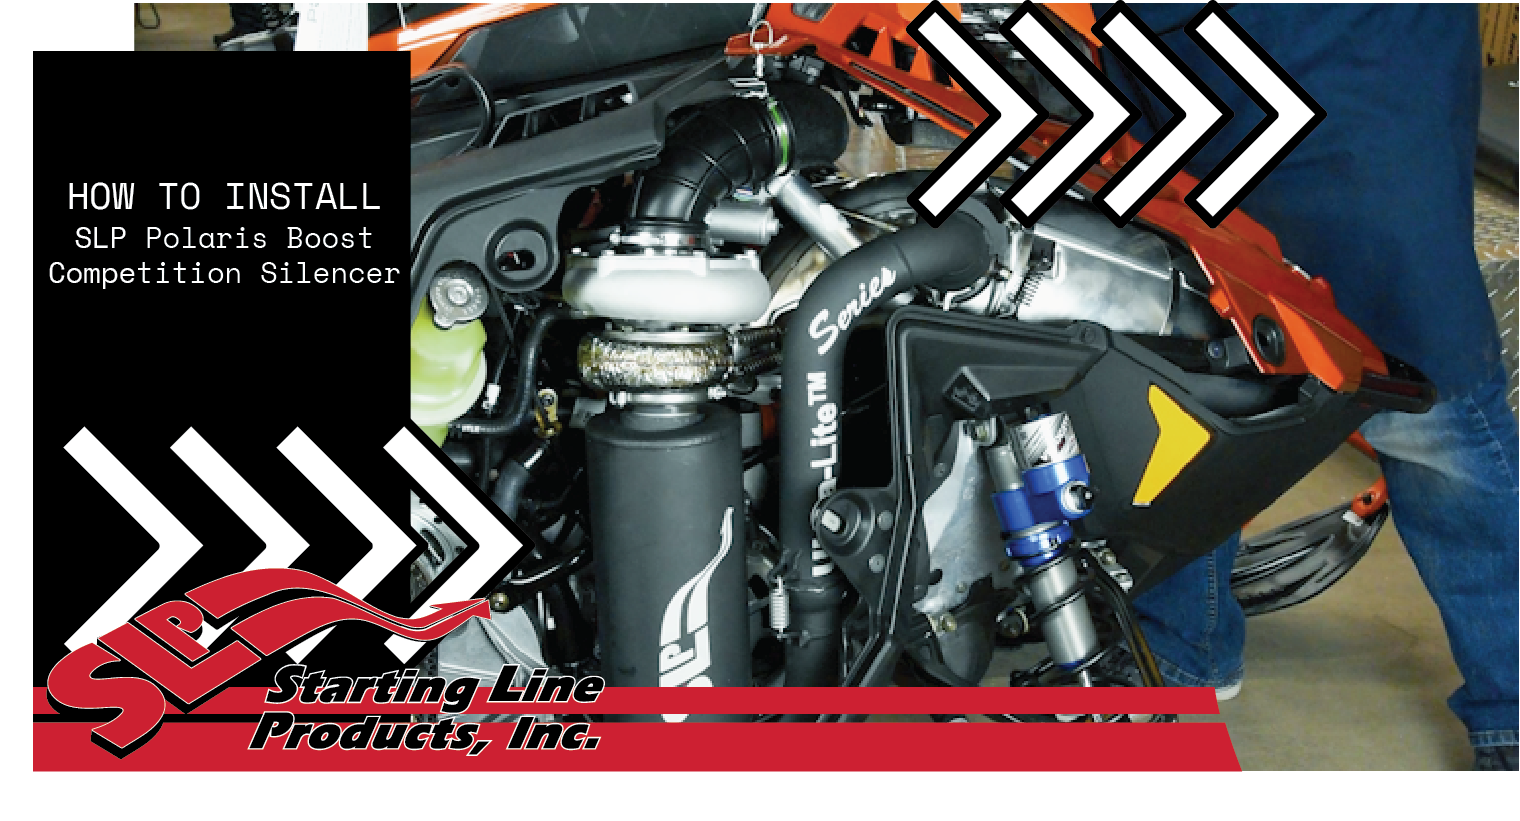 Starting Line Products | How to Install Polaris Boost Competition Silencer